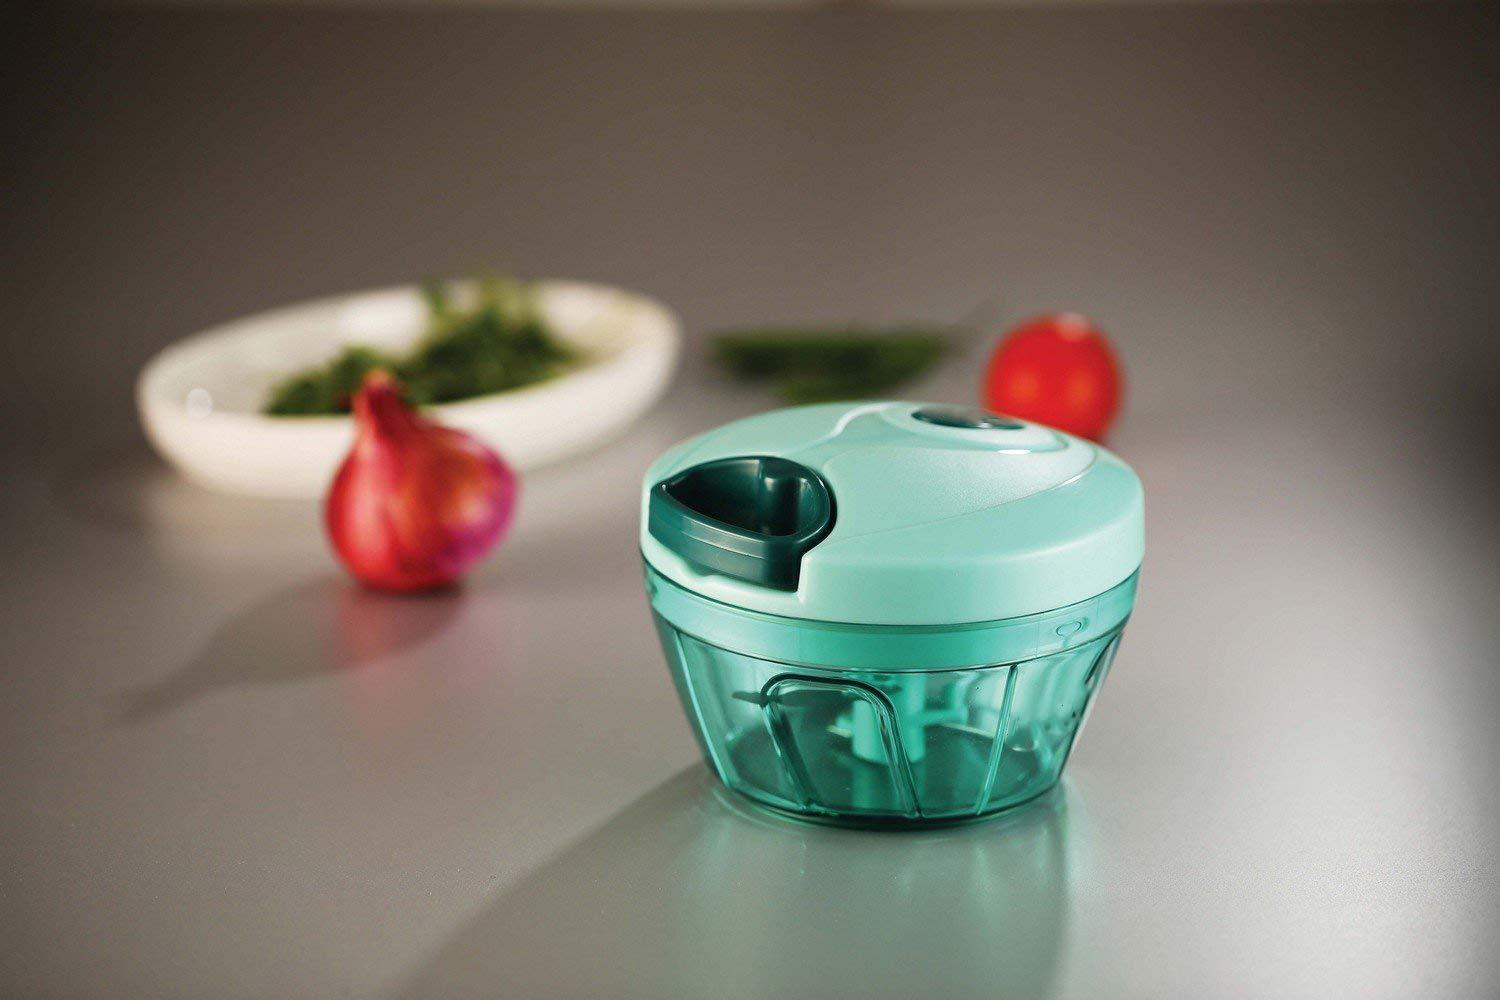 Manual Handy and Compact Vegetable Chopper/Blender